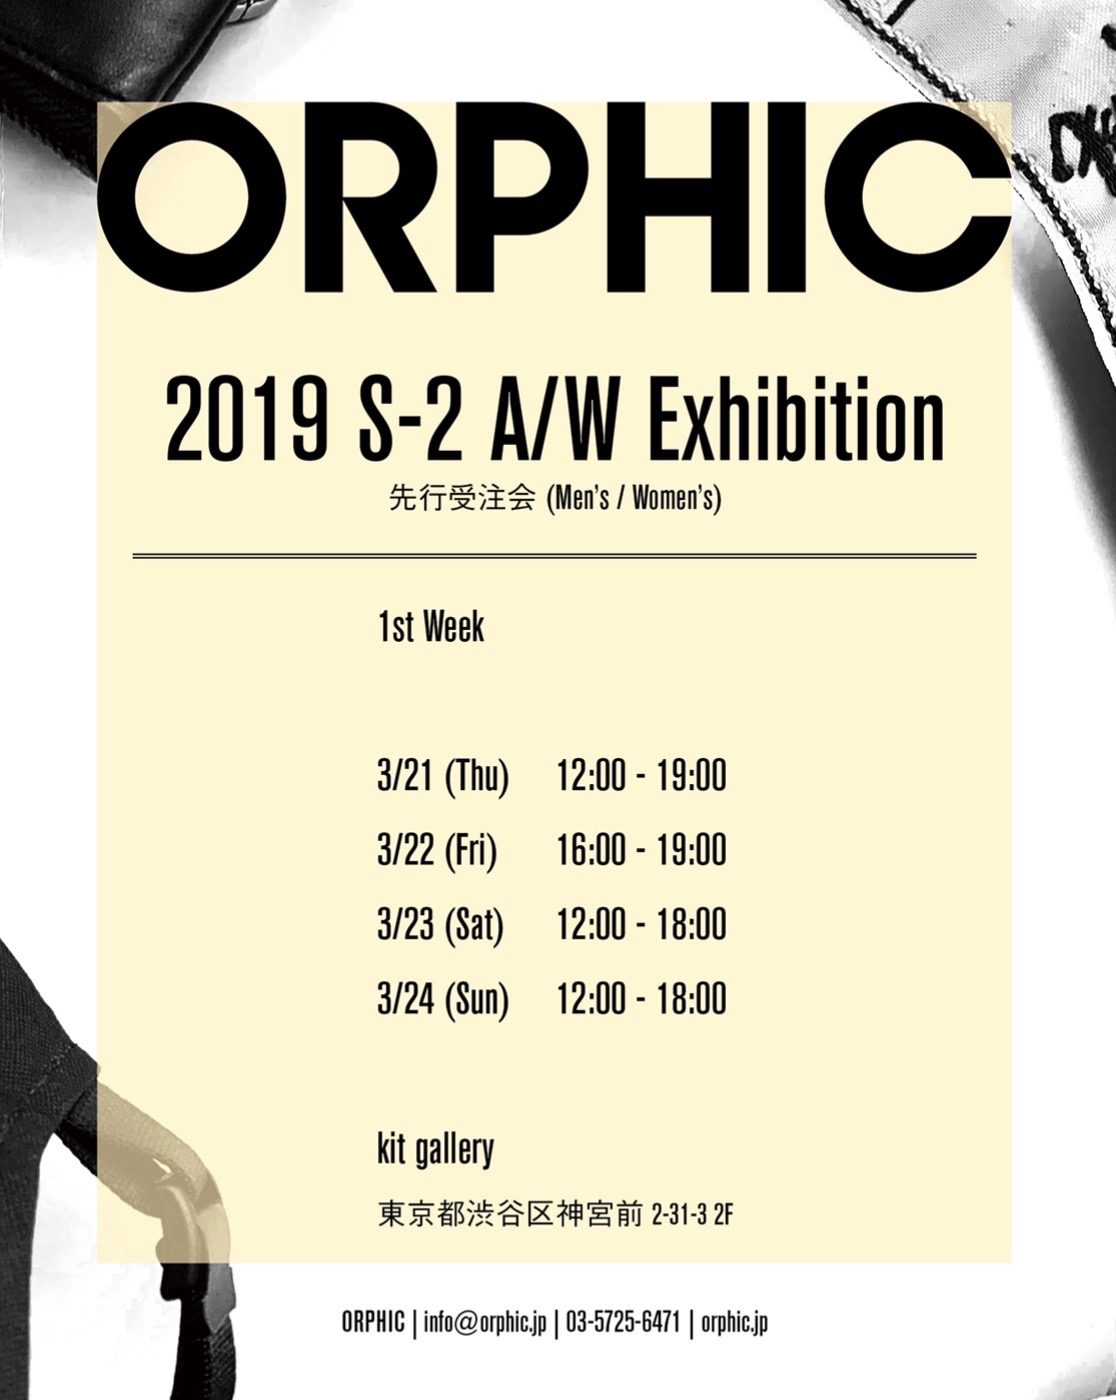 http://kit-gallery.com/schedule/files/orphic2019.jpeg